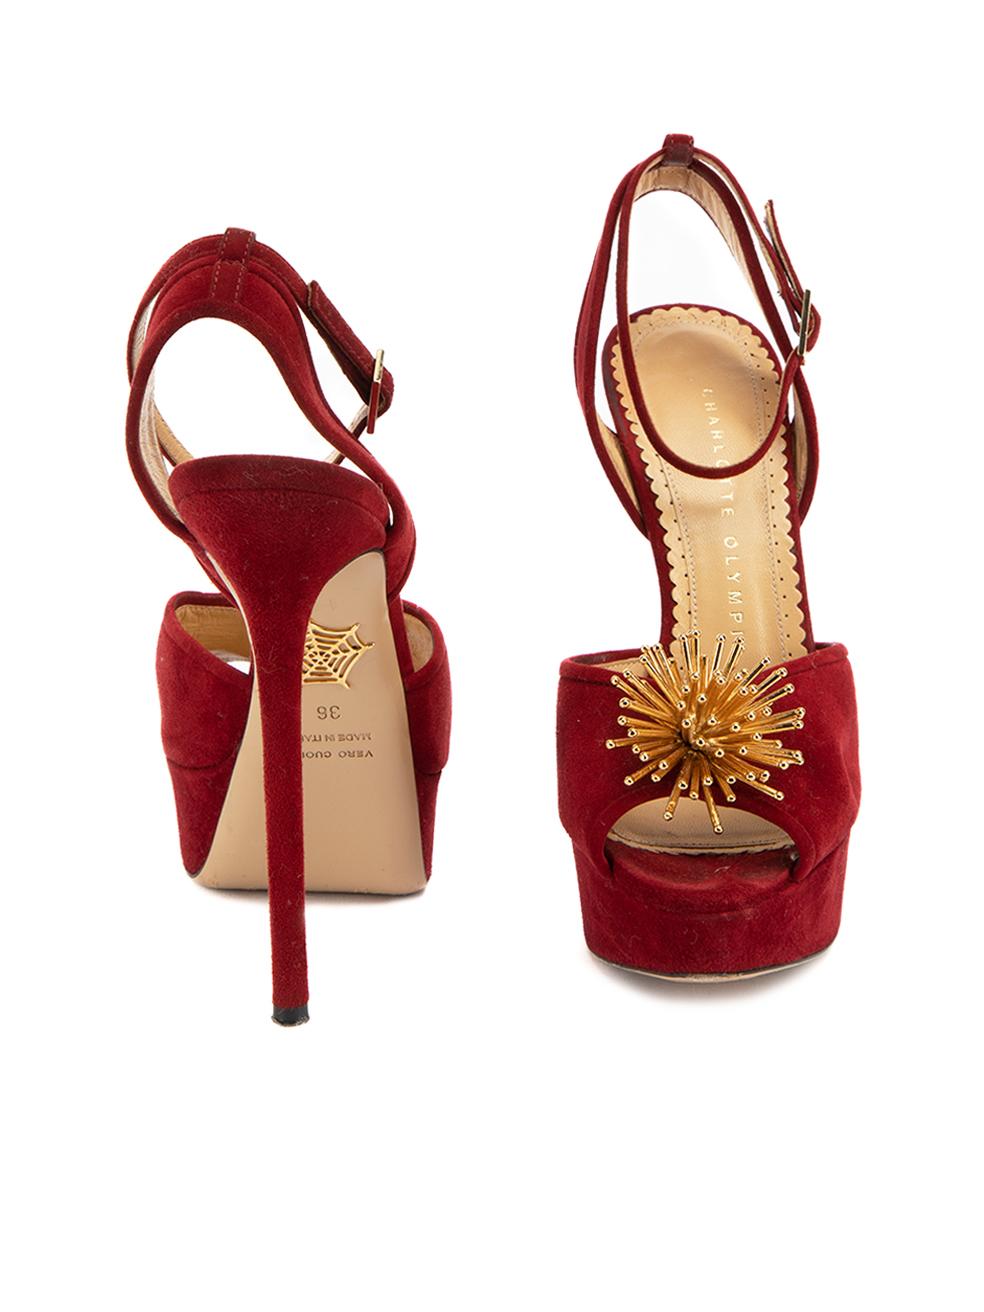 Charlotte Olympia Women's Burgundy Suede Metal Accent Platform Heels In Excellent Condition For Sale In London, GB